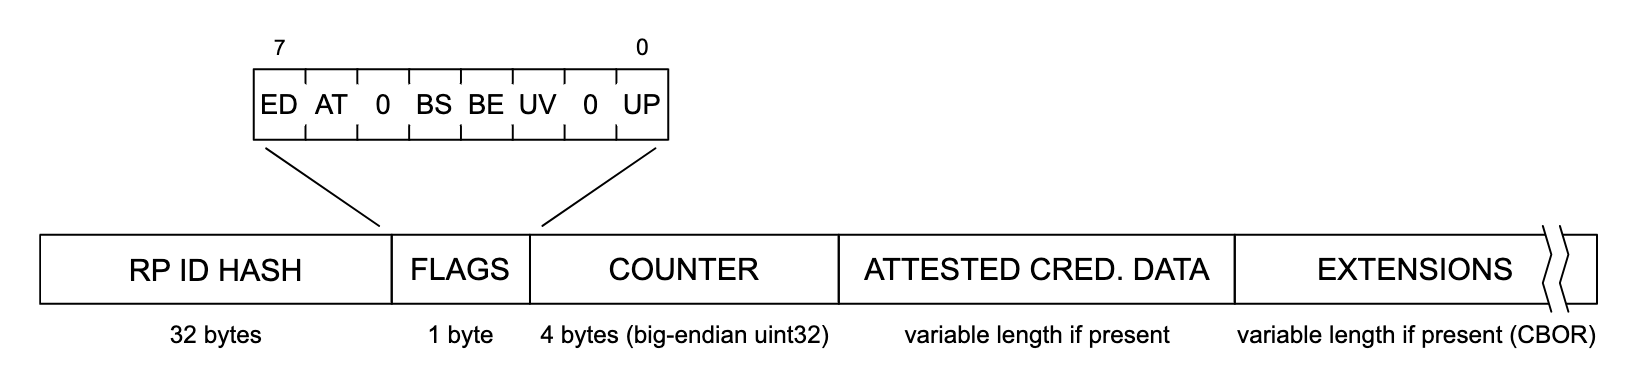 A depiction of the authentication data structure. From left to right, each section of the data structure reads 'RP ID HASH' (32 bytes), 'FLAGS' (1 byte), 'COUNTER' (4 bytes, big-endian uint32), 'ATTESTE CRED. DATA' (variable length if present), and 'EXTENSIONS' (variable length if present (CBOR)). The 'FLAGS' section is expanded to show a list of potential flags, labeled from left to right: 'ED', 'AT', '0', 'BS', 'BE', 'UV', '0', and 'UP'.